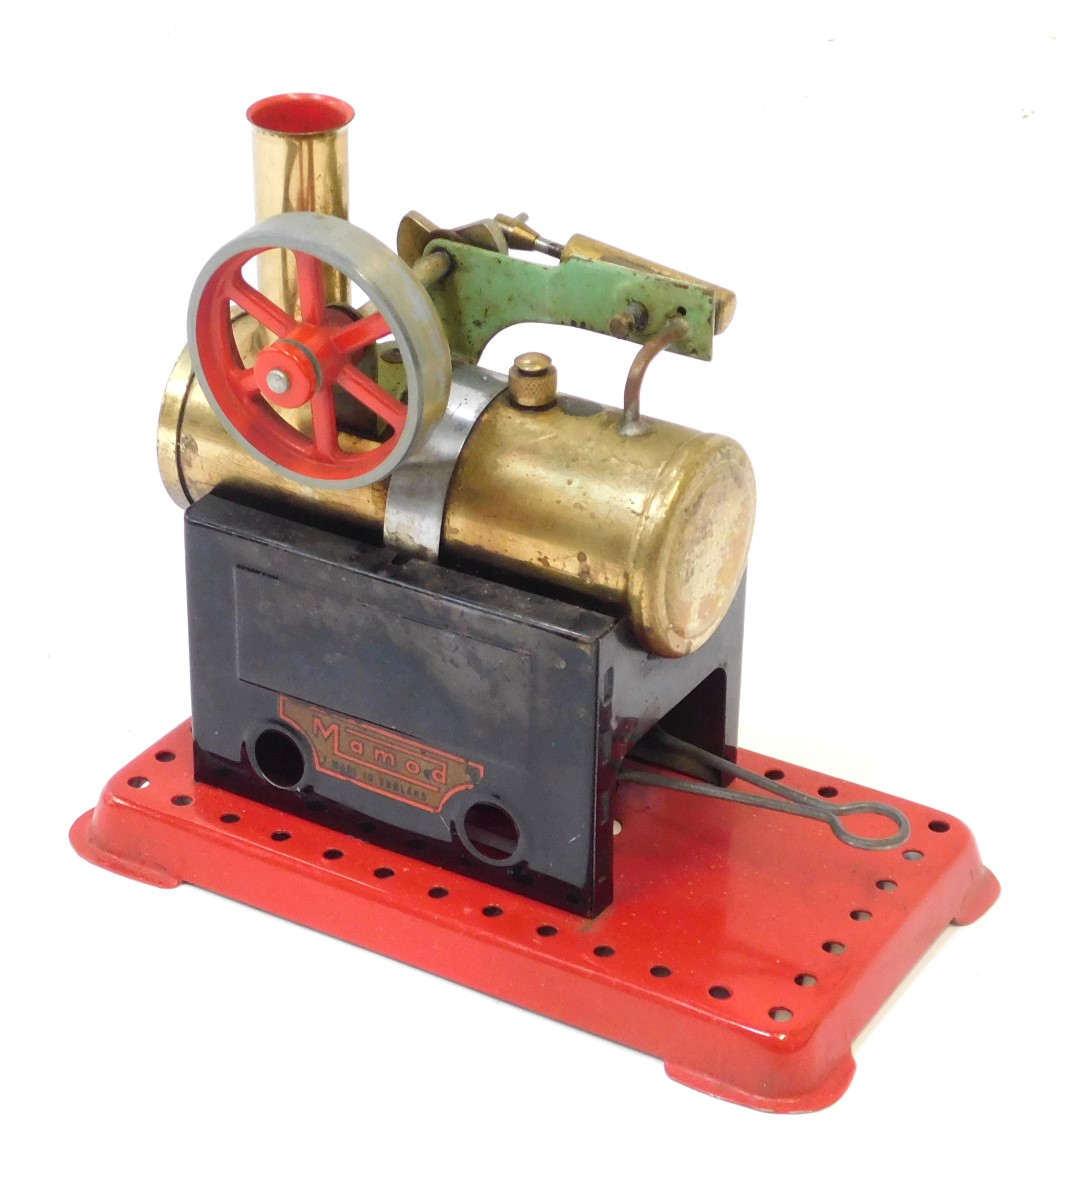 A Mamod steam traction model, 19cm high.